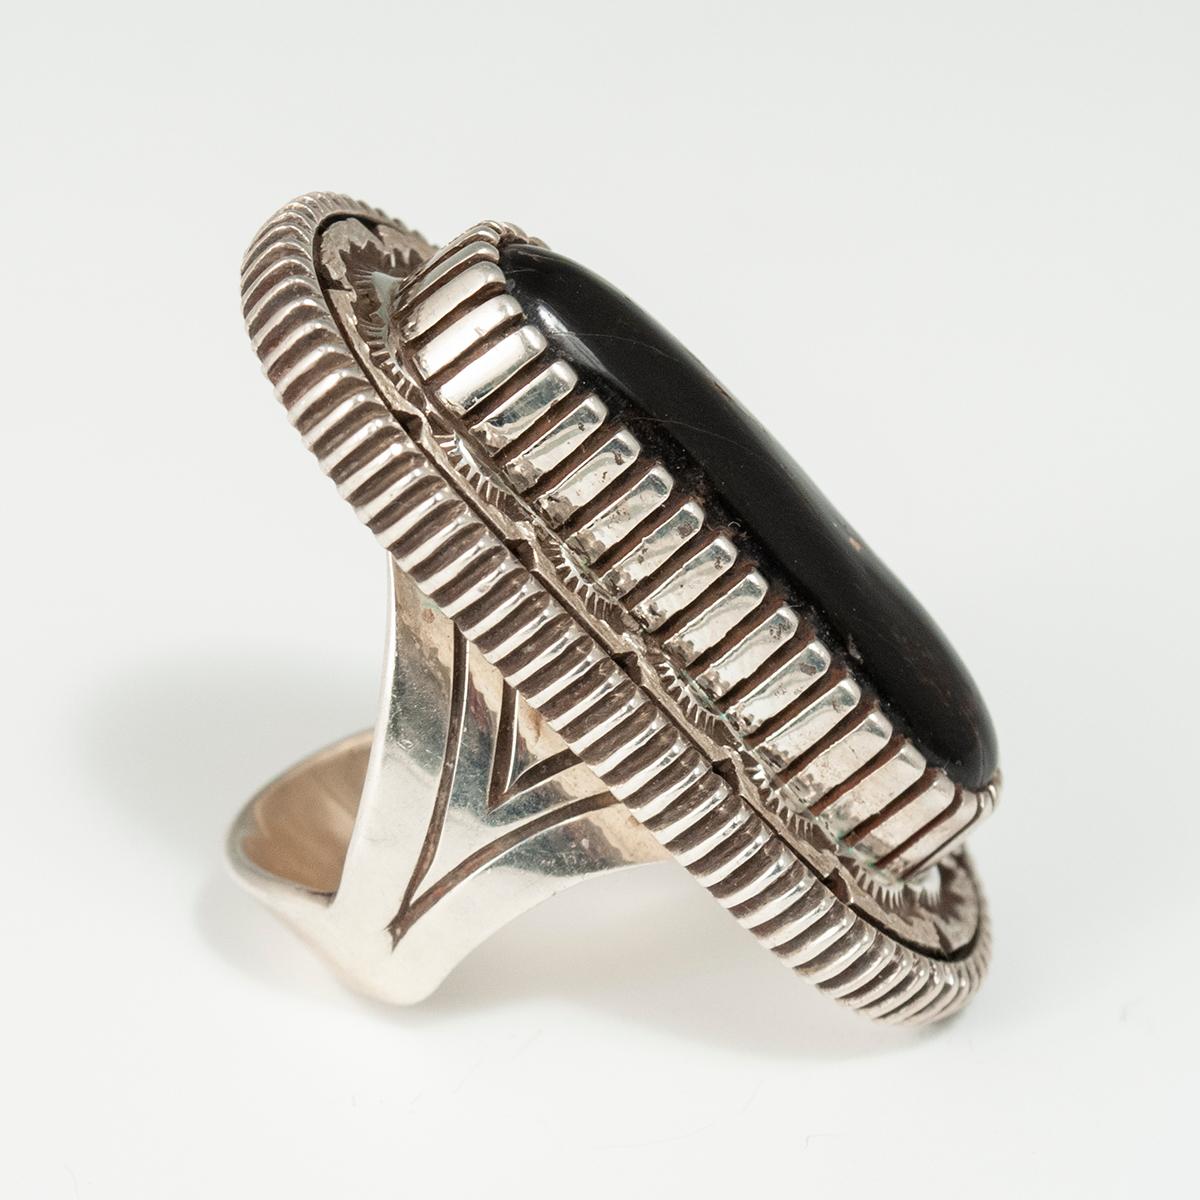 20th century black coral and silver ring by Navajo Silversmith Mitchell Toney 

A contemporary black coral and sterling silver ring by Navajo silversmith Mitchell Toney. Size 7.5, weight 26 grams.
Measures: H 1.75 x W 1 x D 0.38 inches.

